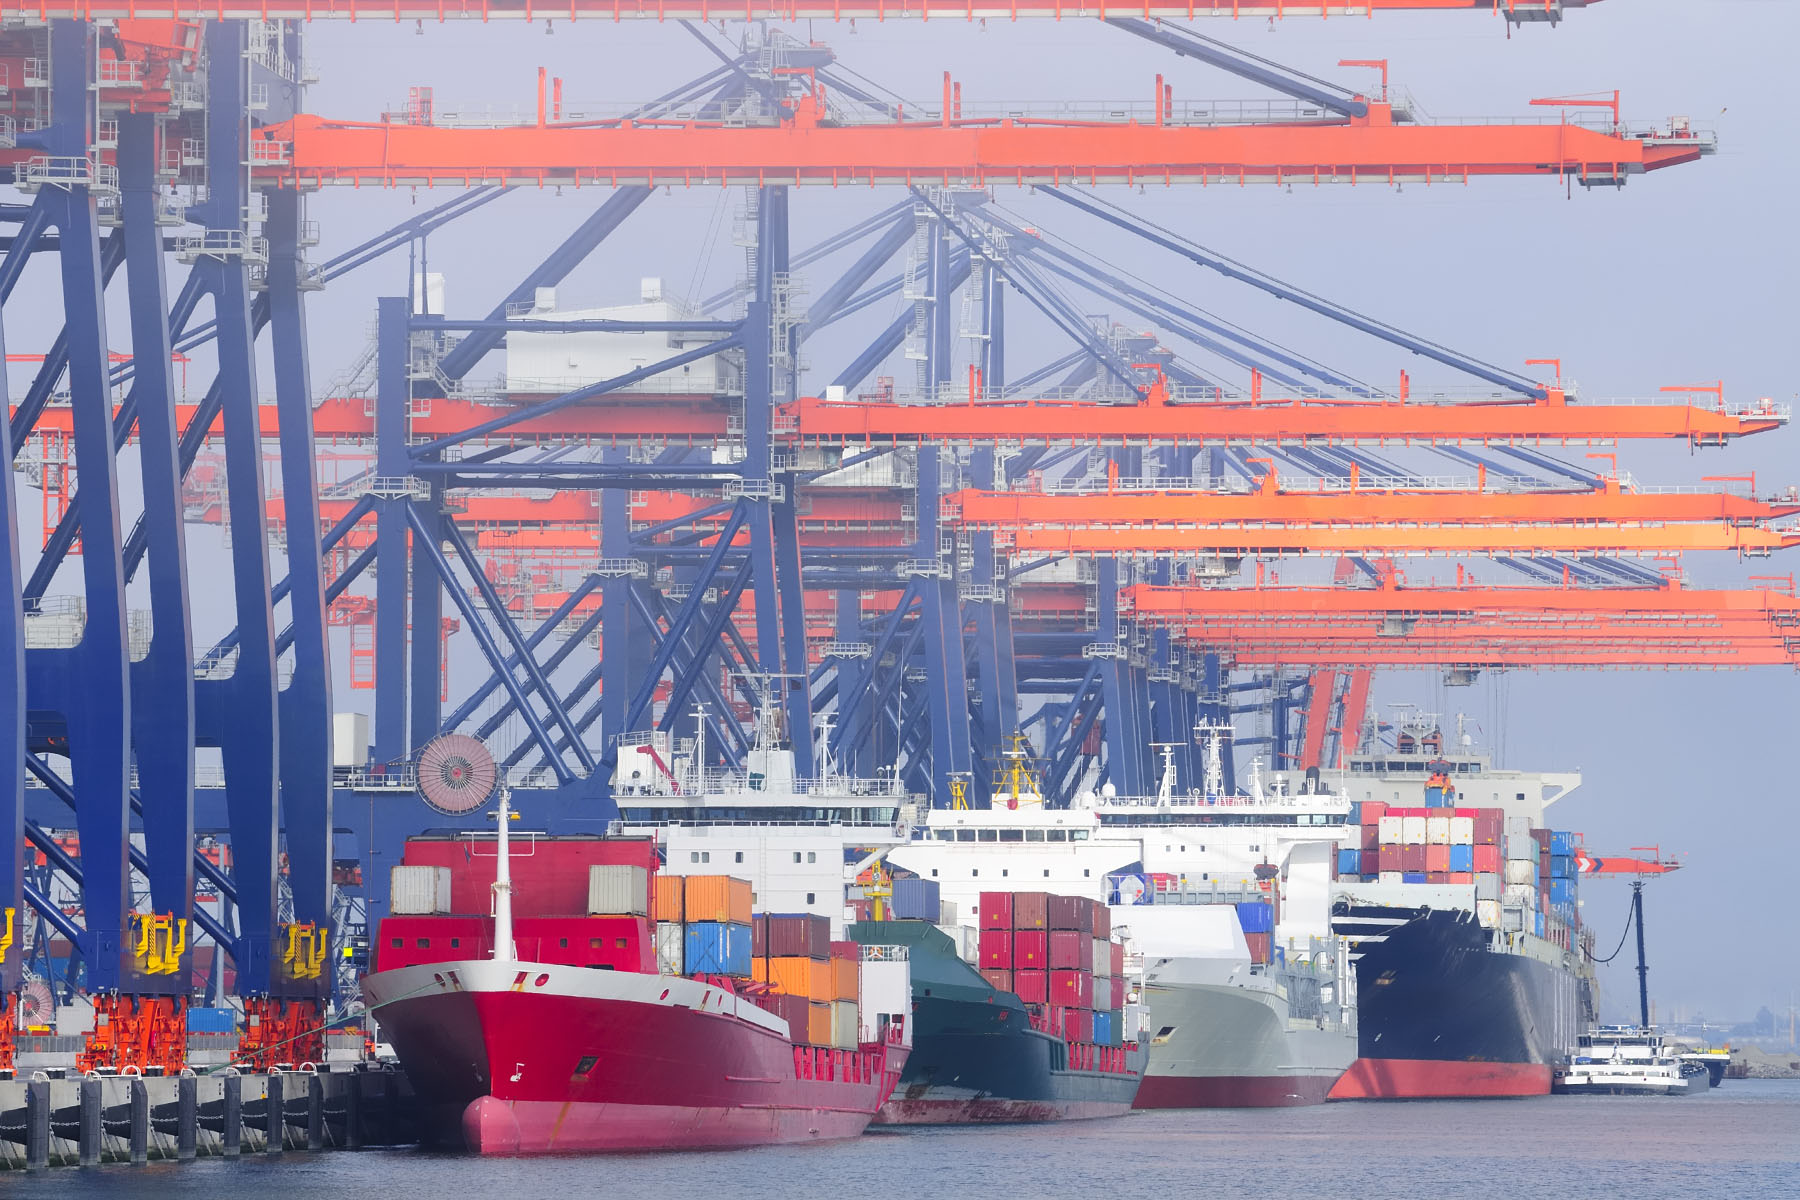 Container terminal in the port of Rotterdam in The Netherlands with four container ships being loaded and unloaded by massive cranes.